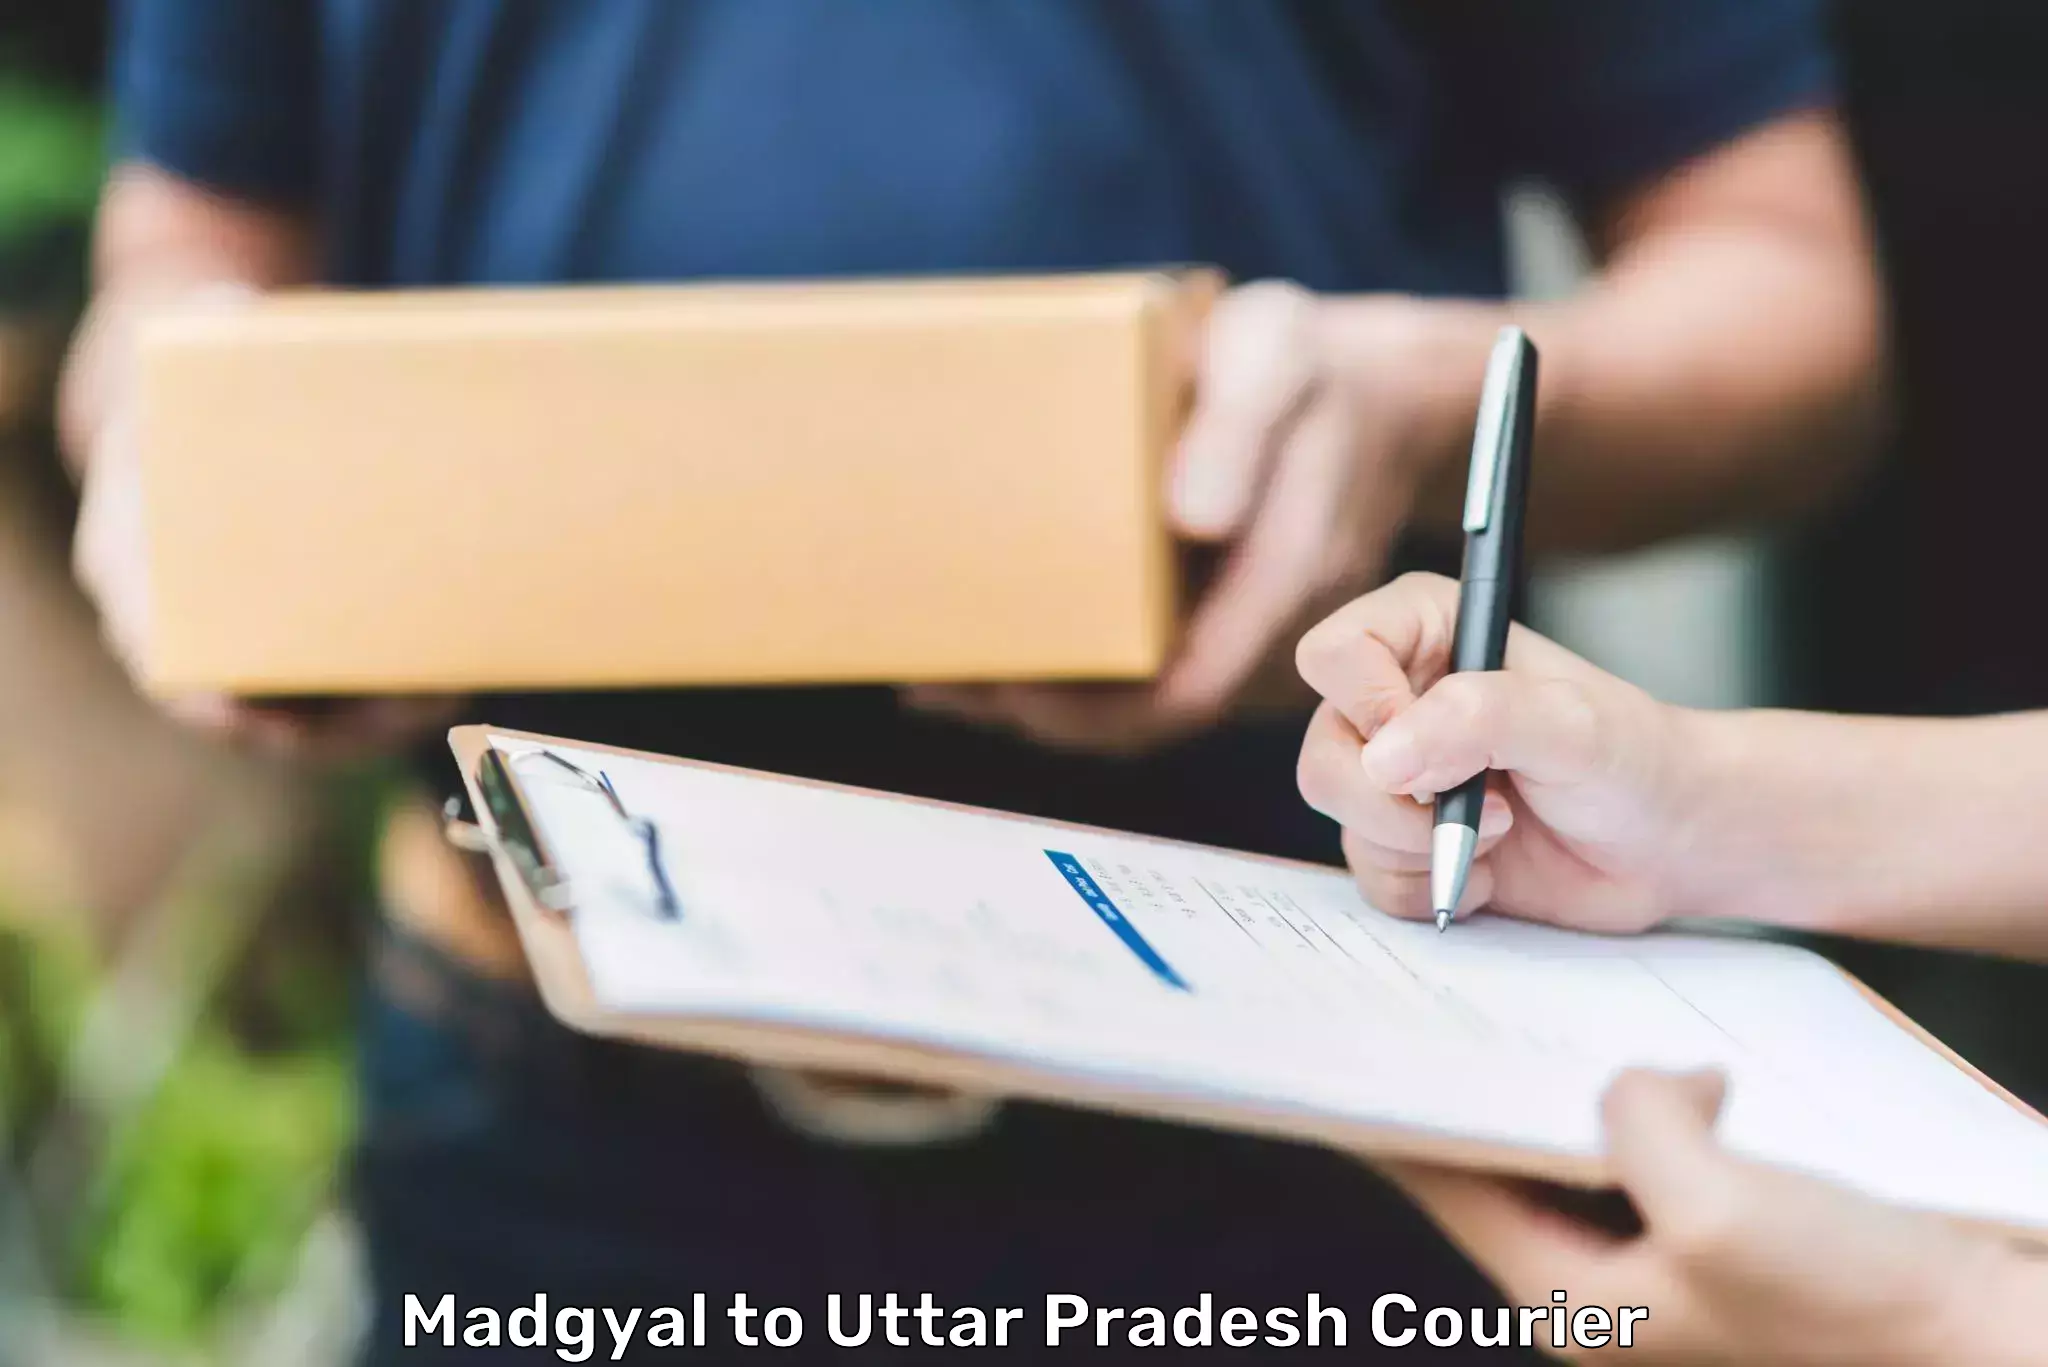 State-of-the-art courier technology Madgyal to Uttar Pradesh